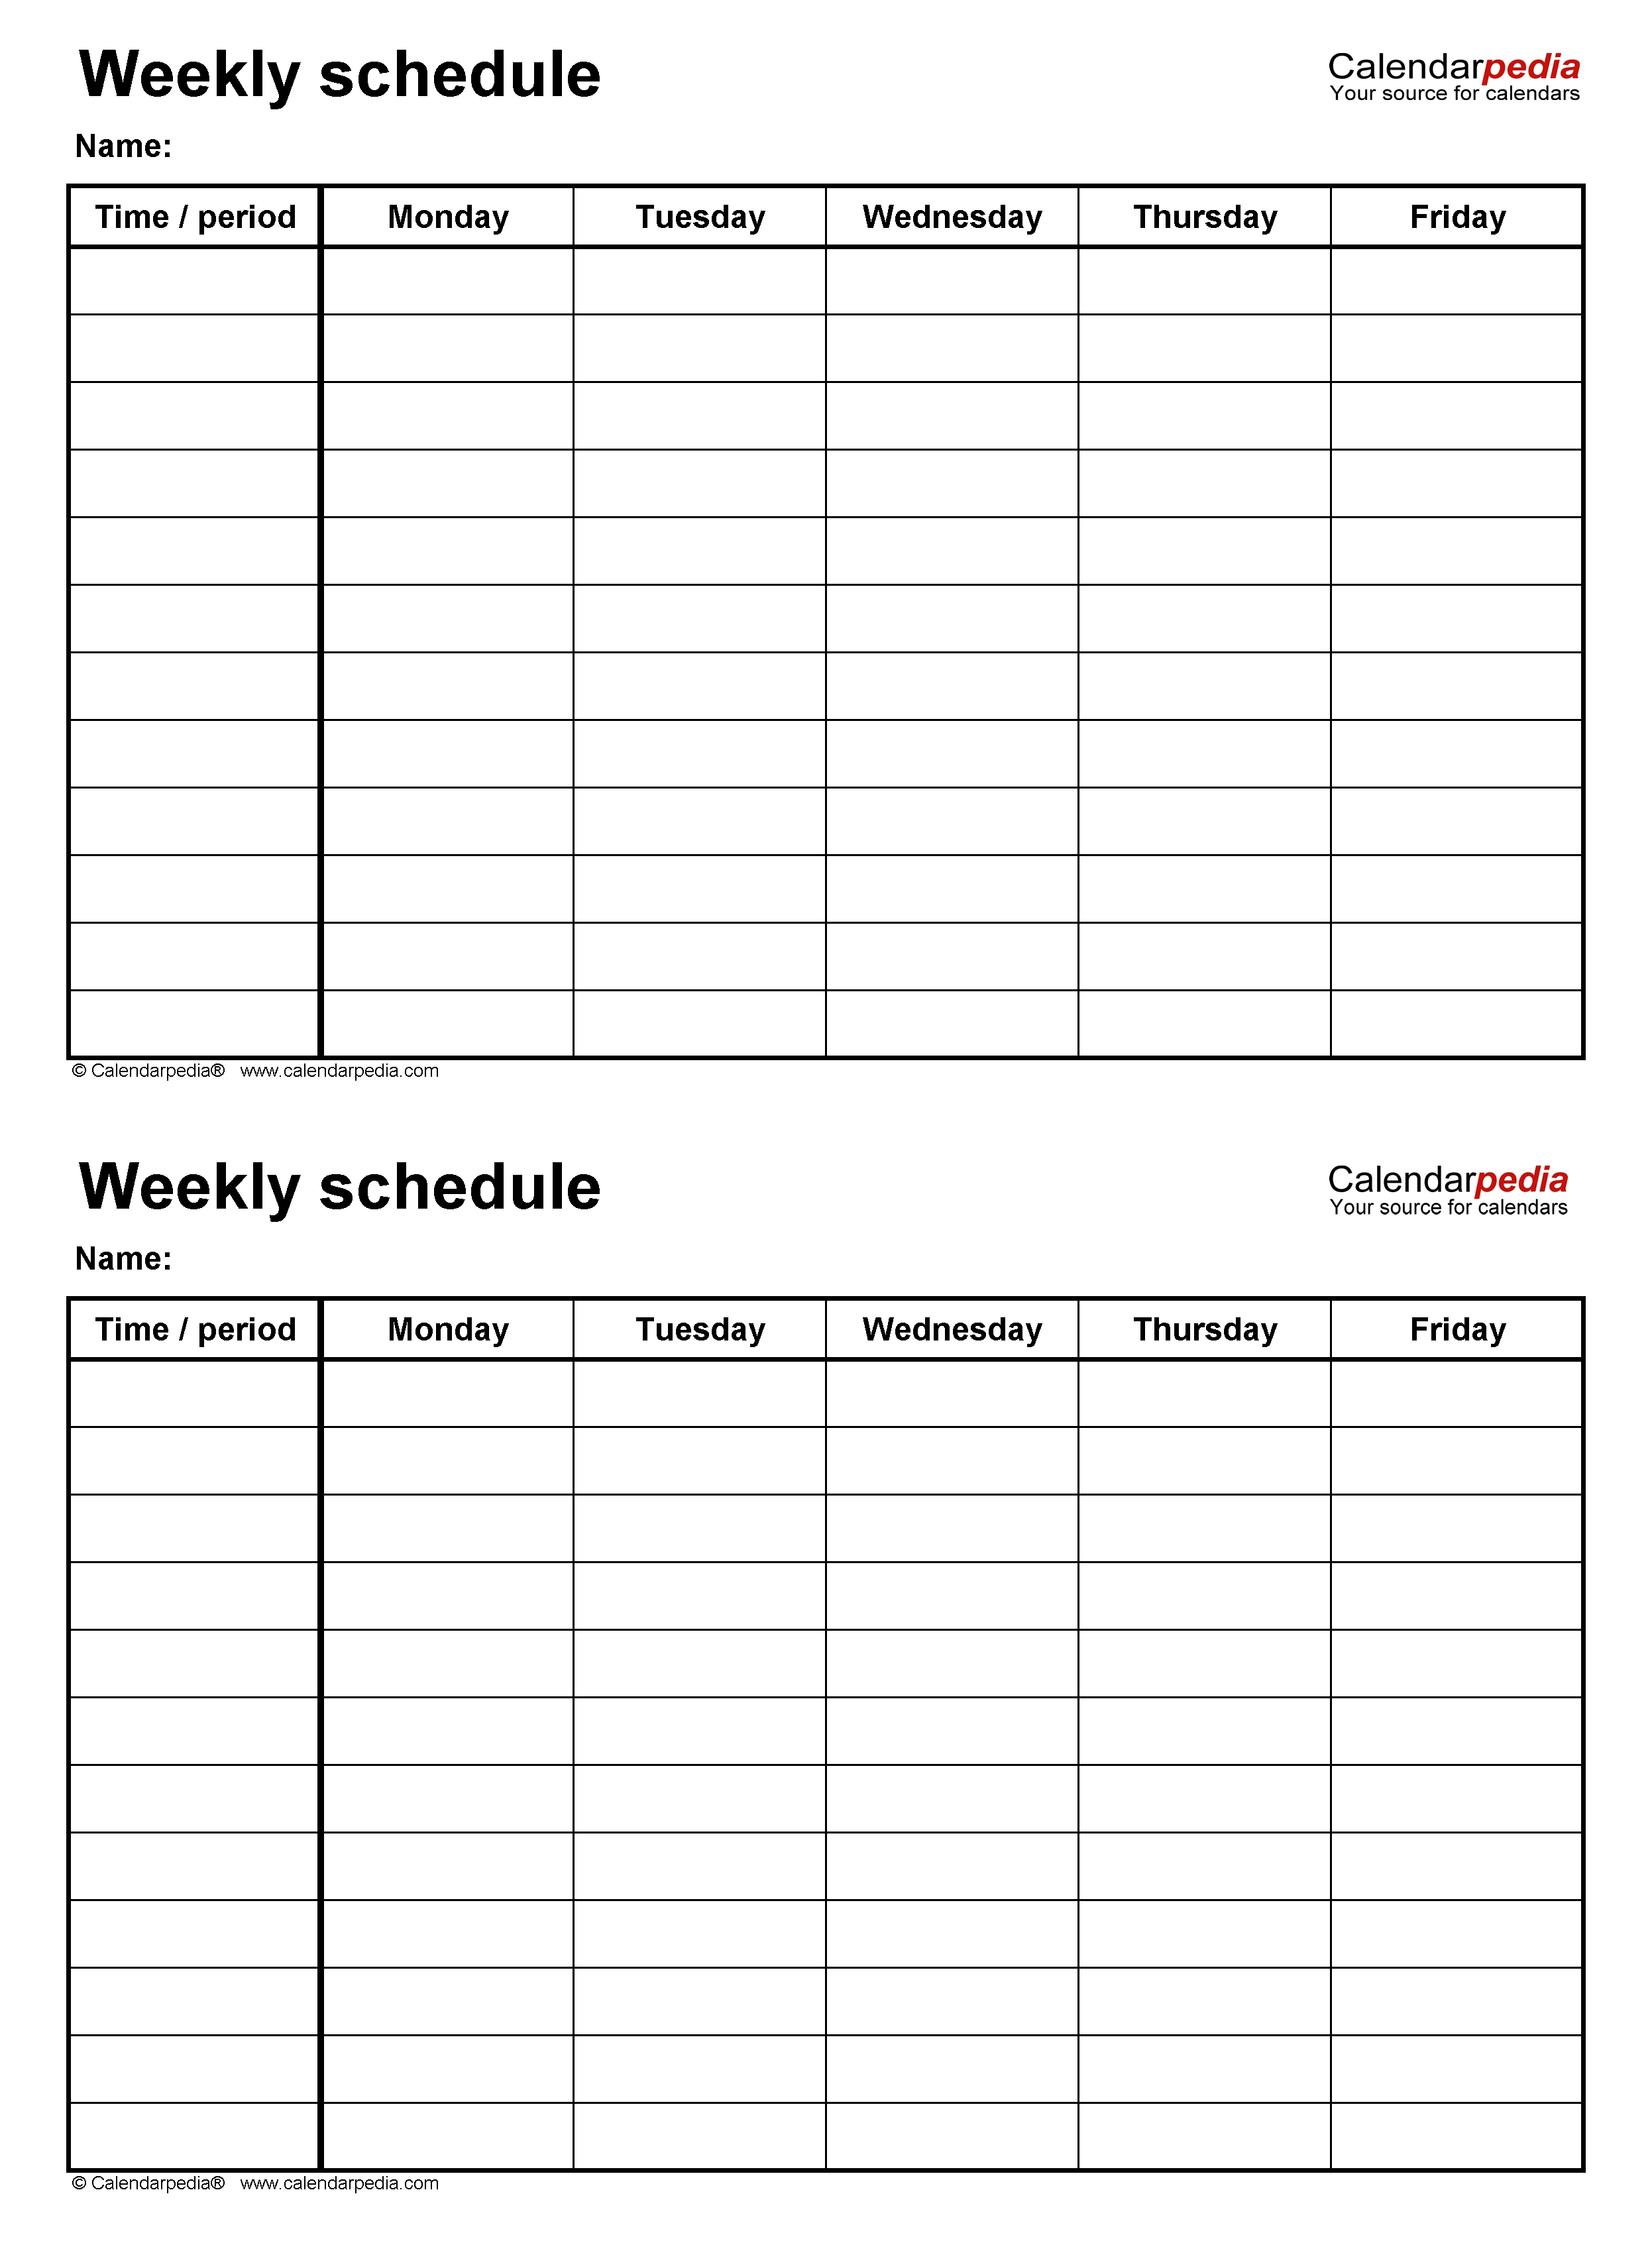 Free Weekly Schedules For Pdf - 18 Templates 2 Week Calendar Template Pdf